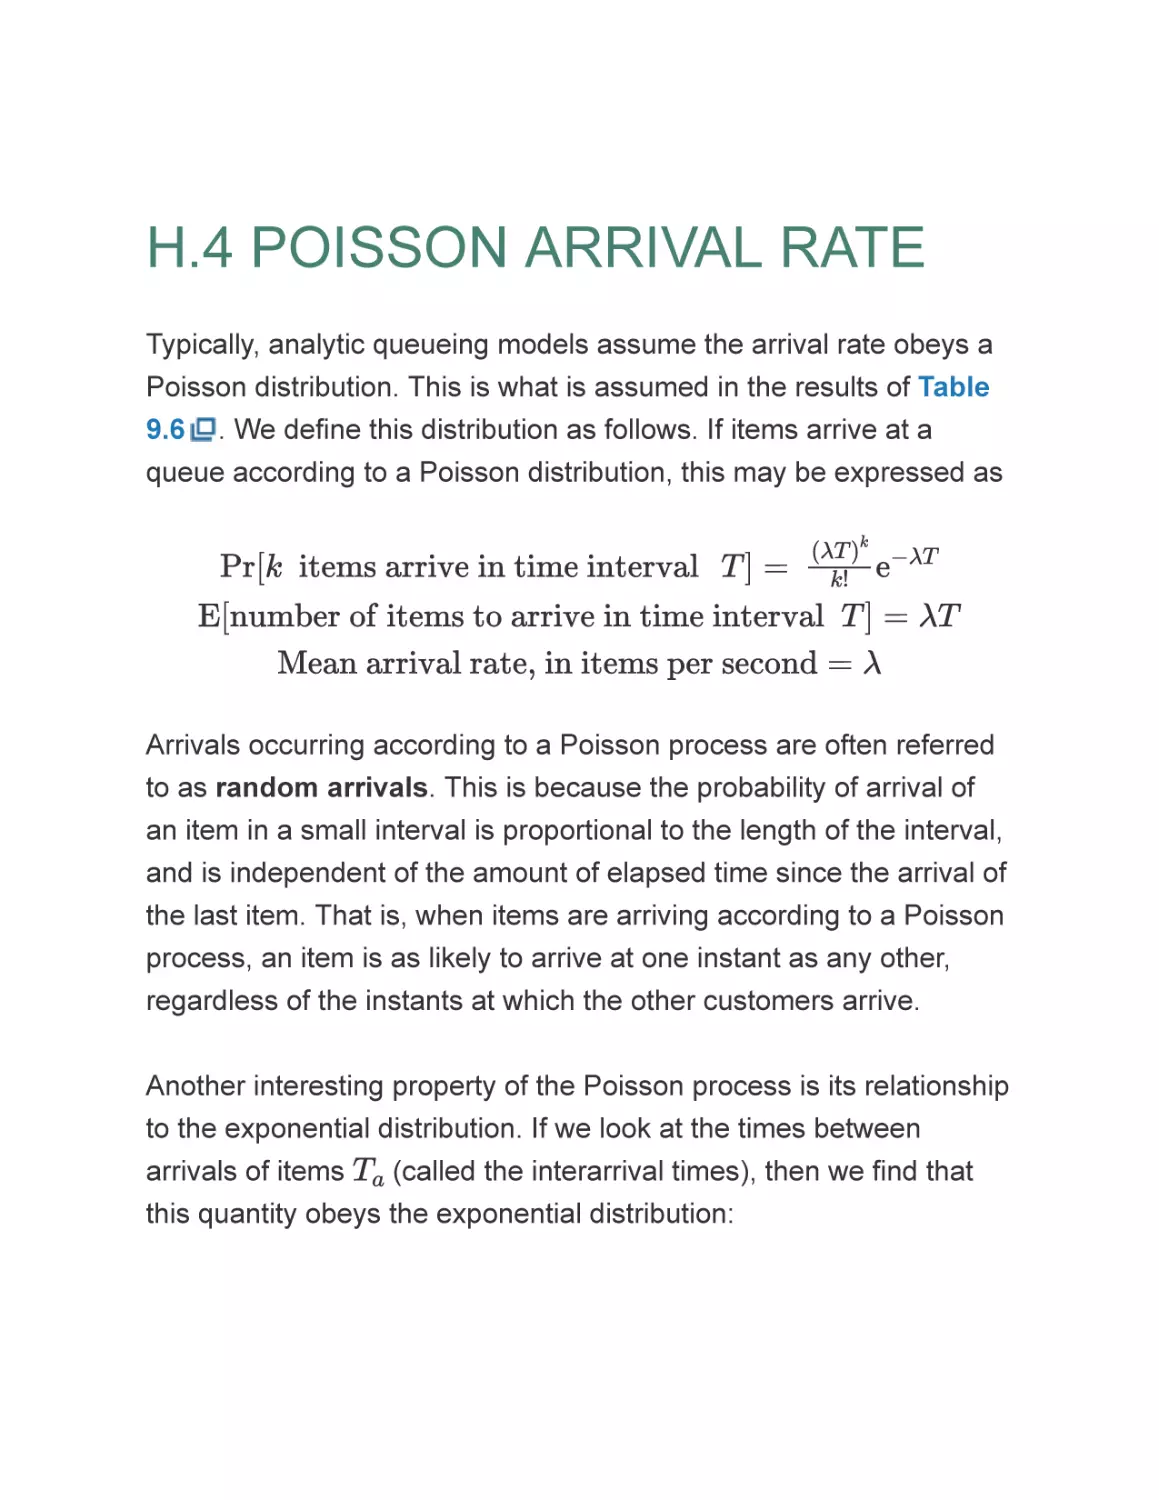 H.4 POISSON ARRIVAL RATE